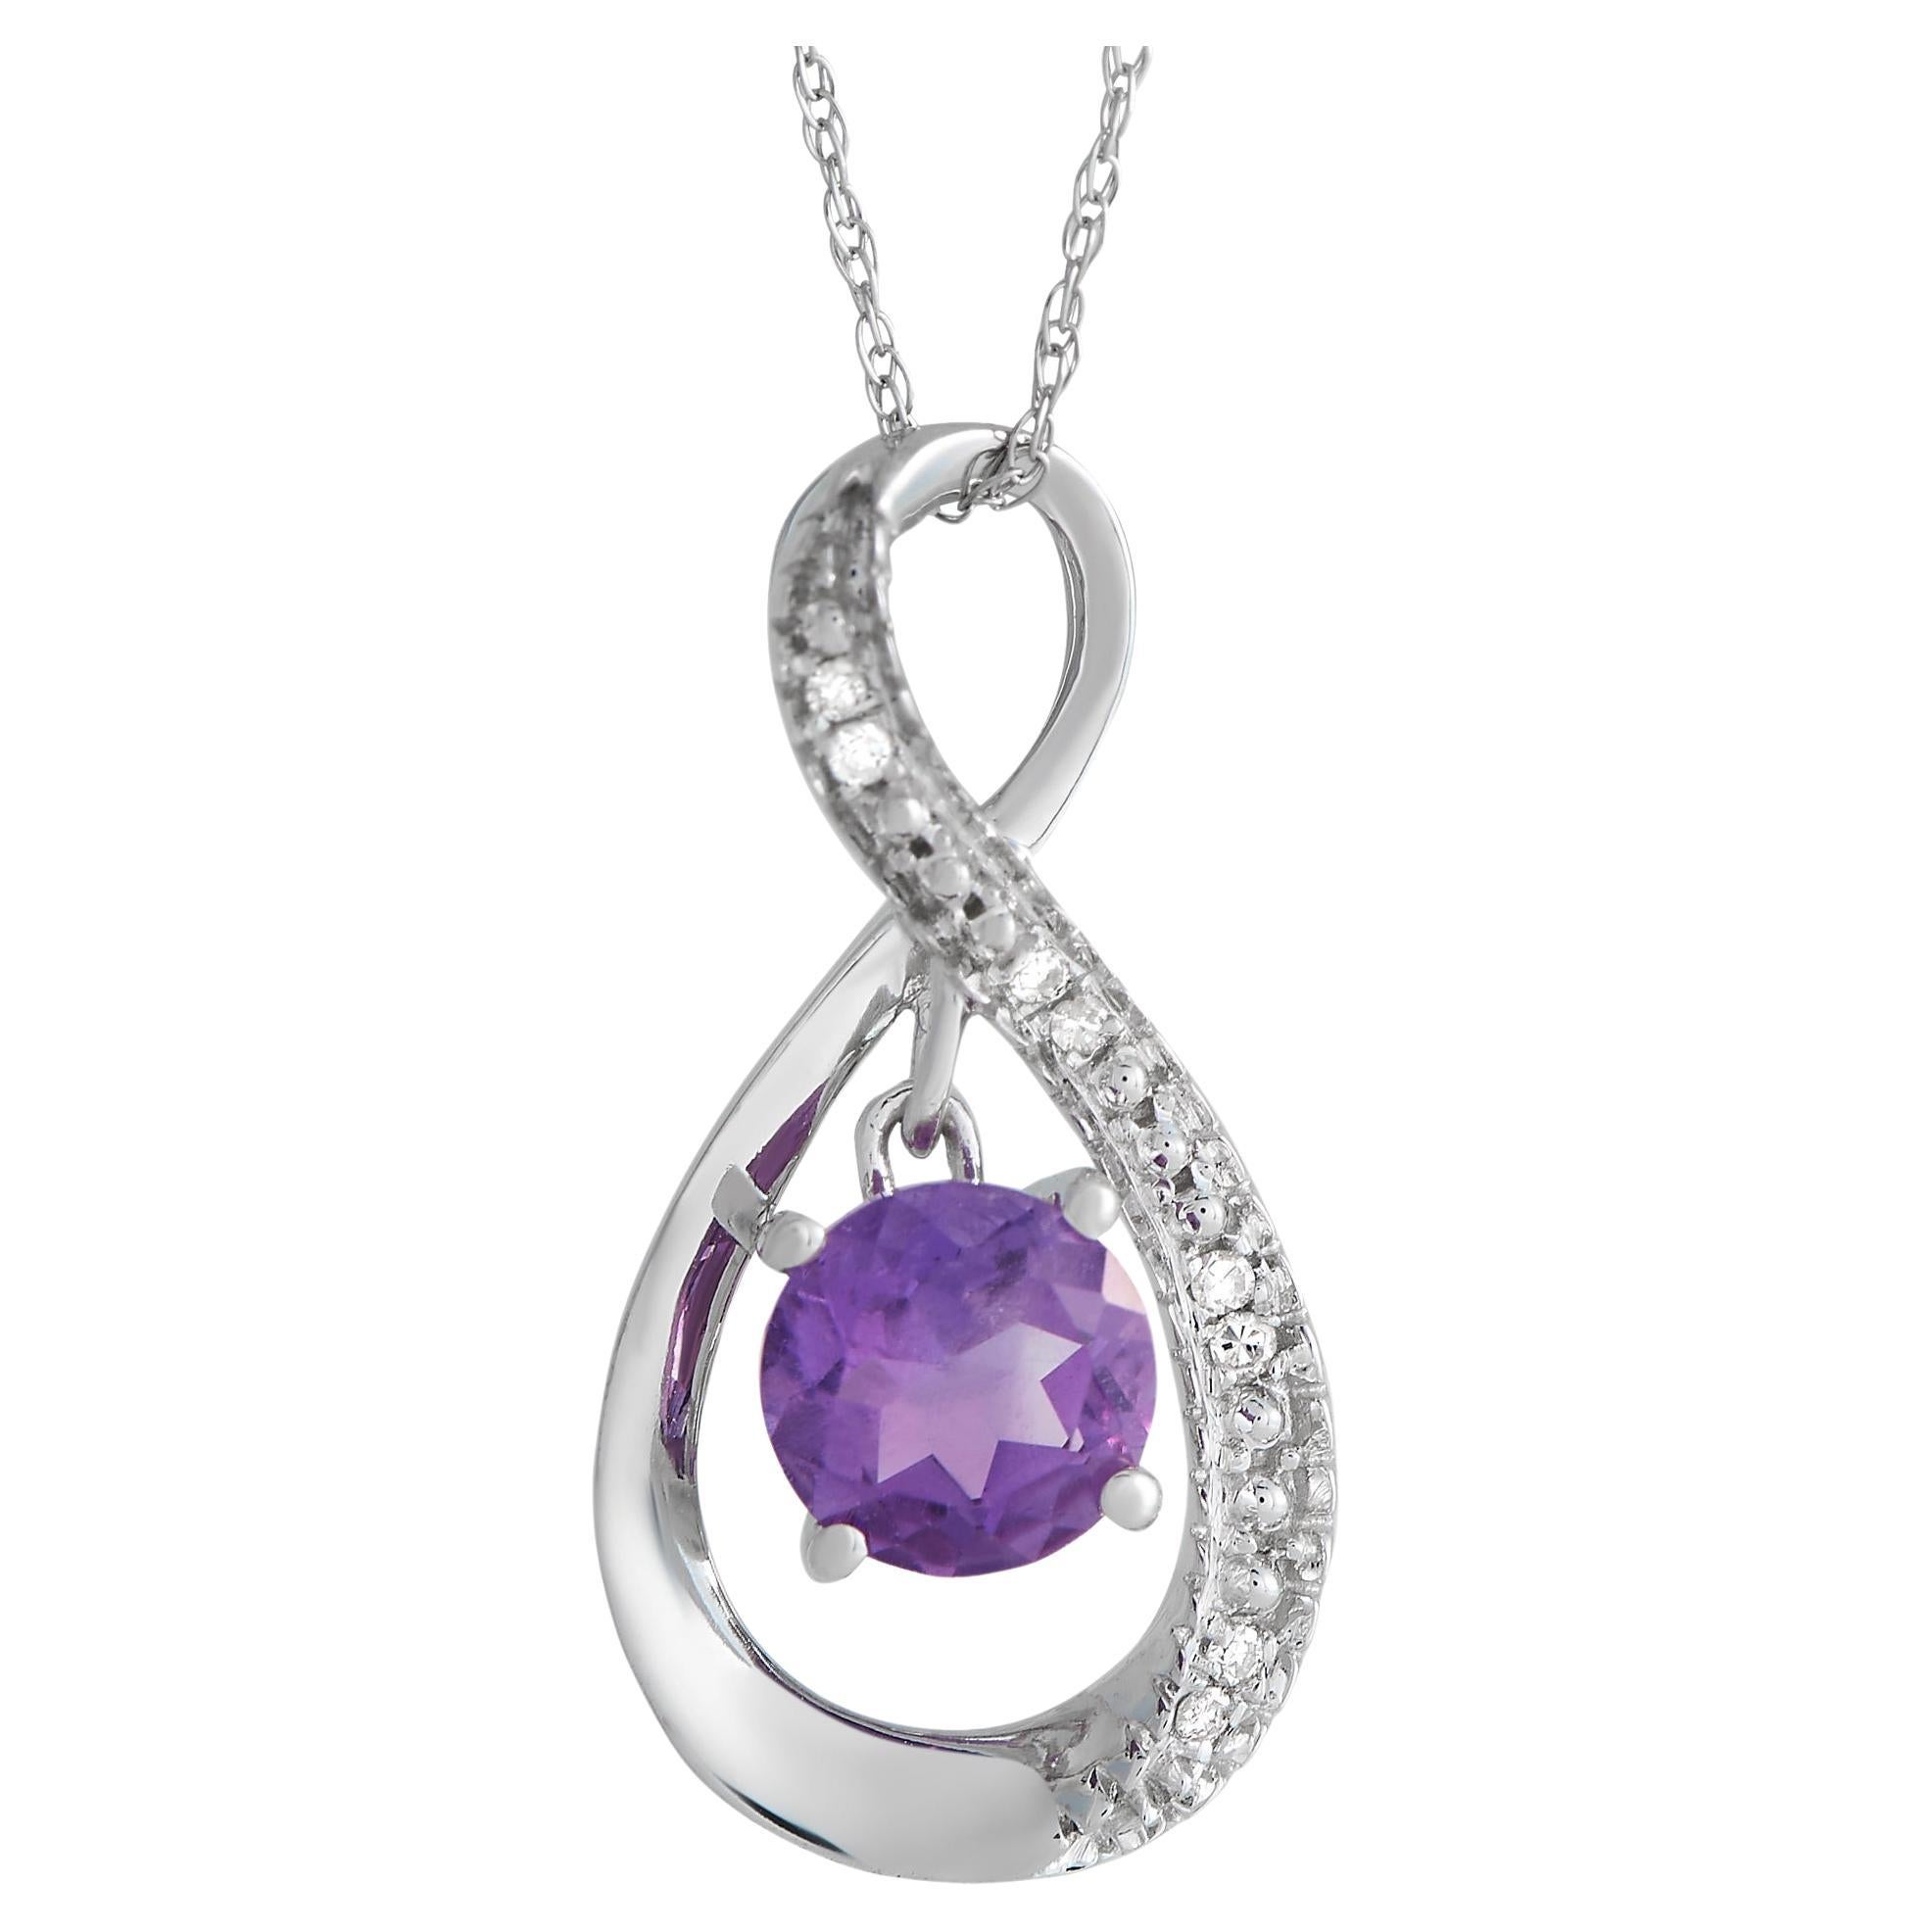 LB Exclusive 14K White Gold 0.03 ct Diamond and Amethyst Pendant Necklace